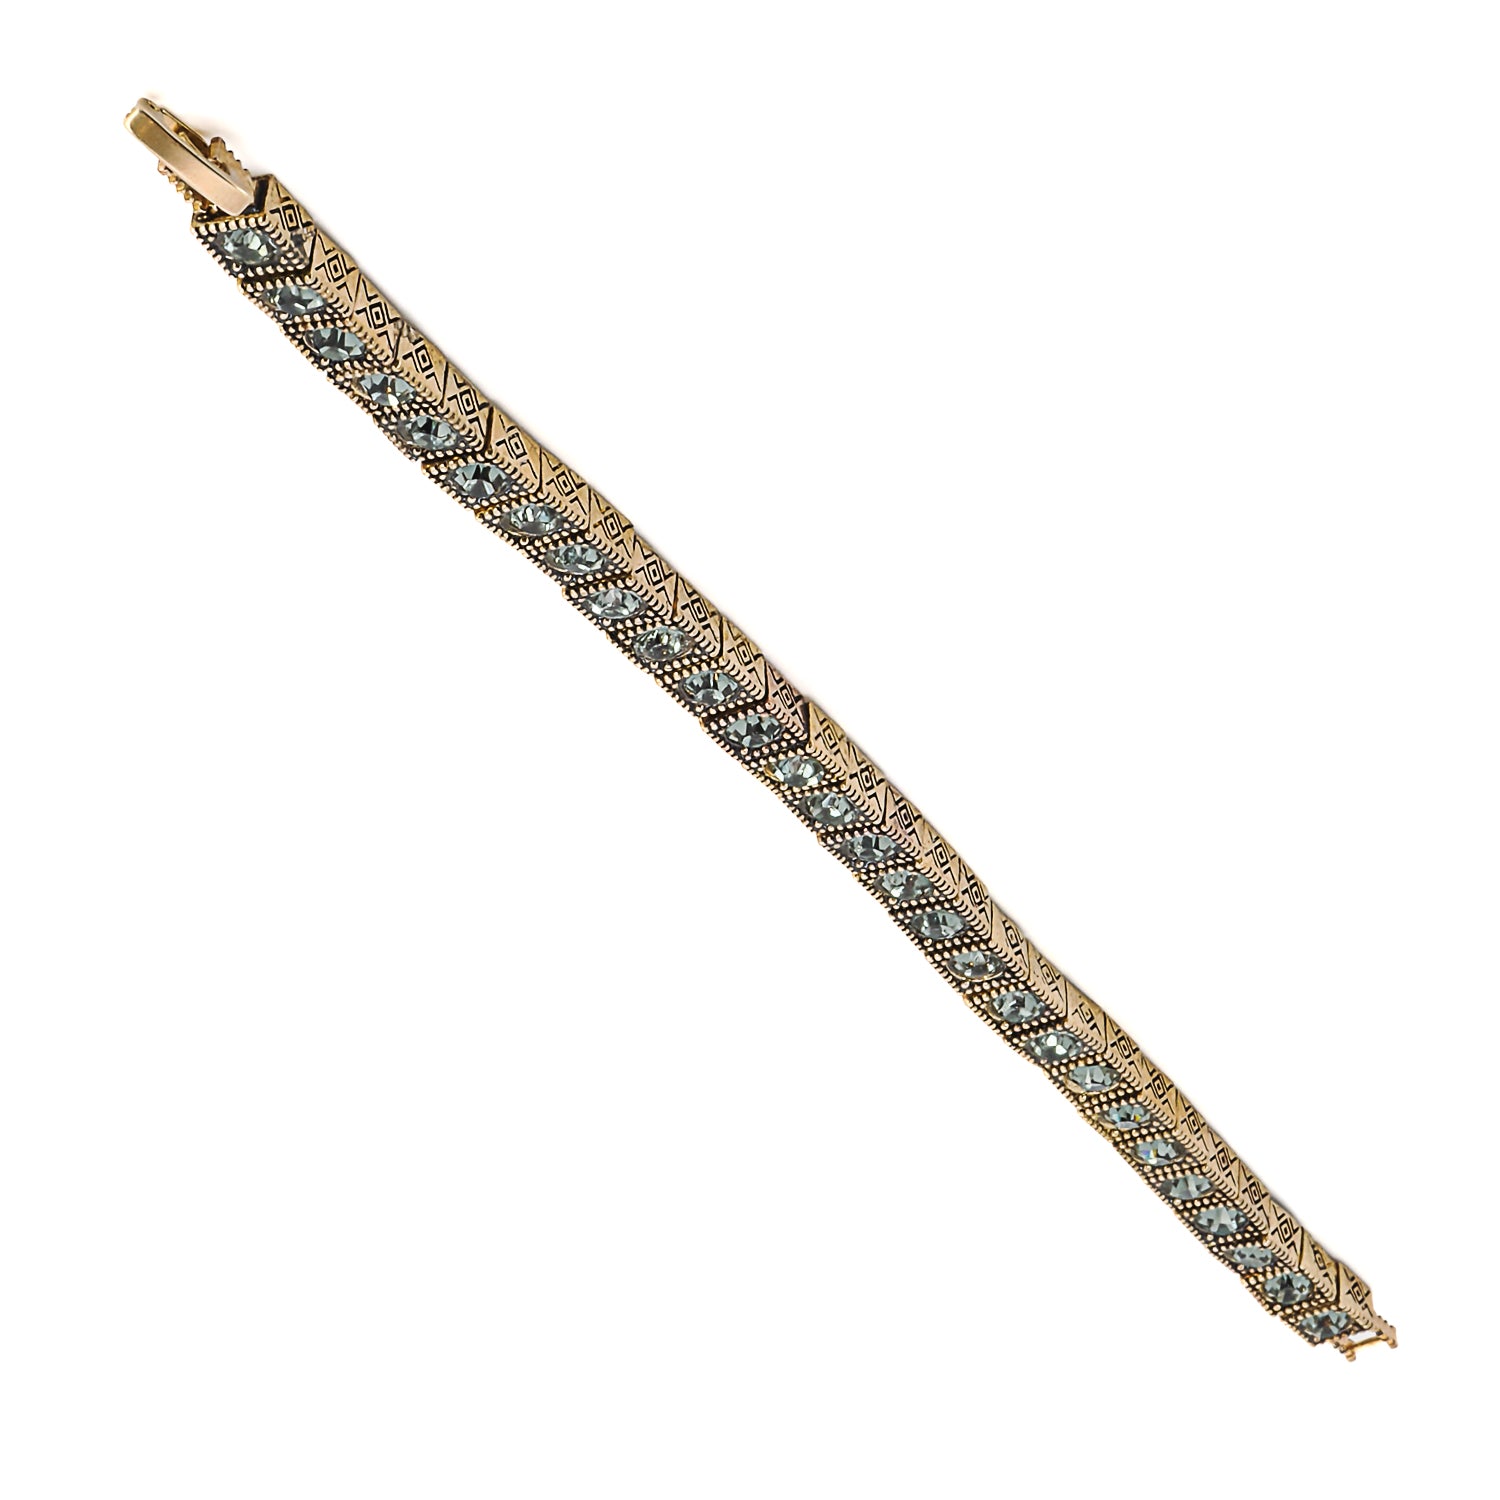 The handcrafted Tennis Bracelet showcasing its unique combination of bronze and green crystals.